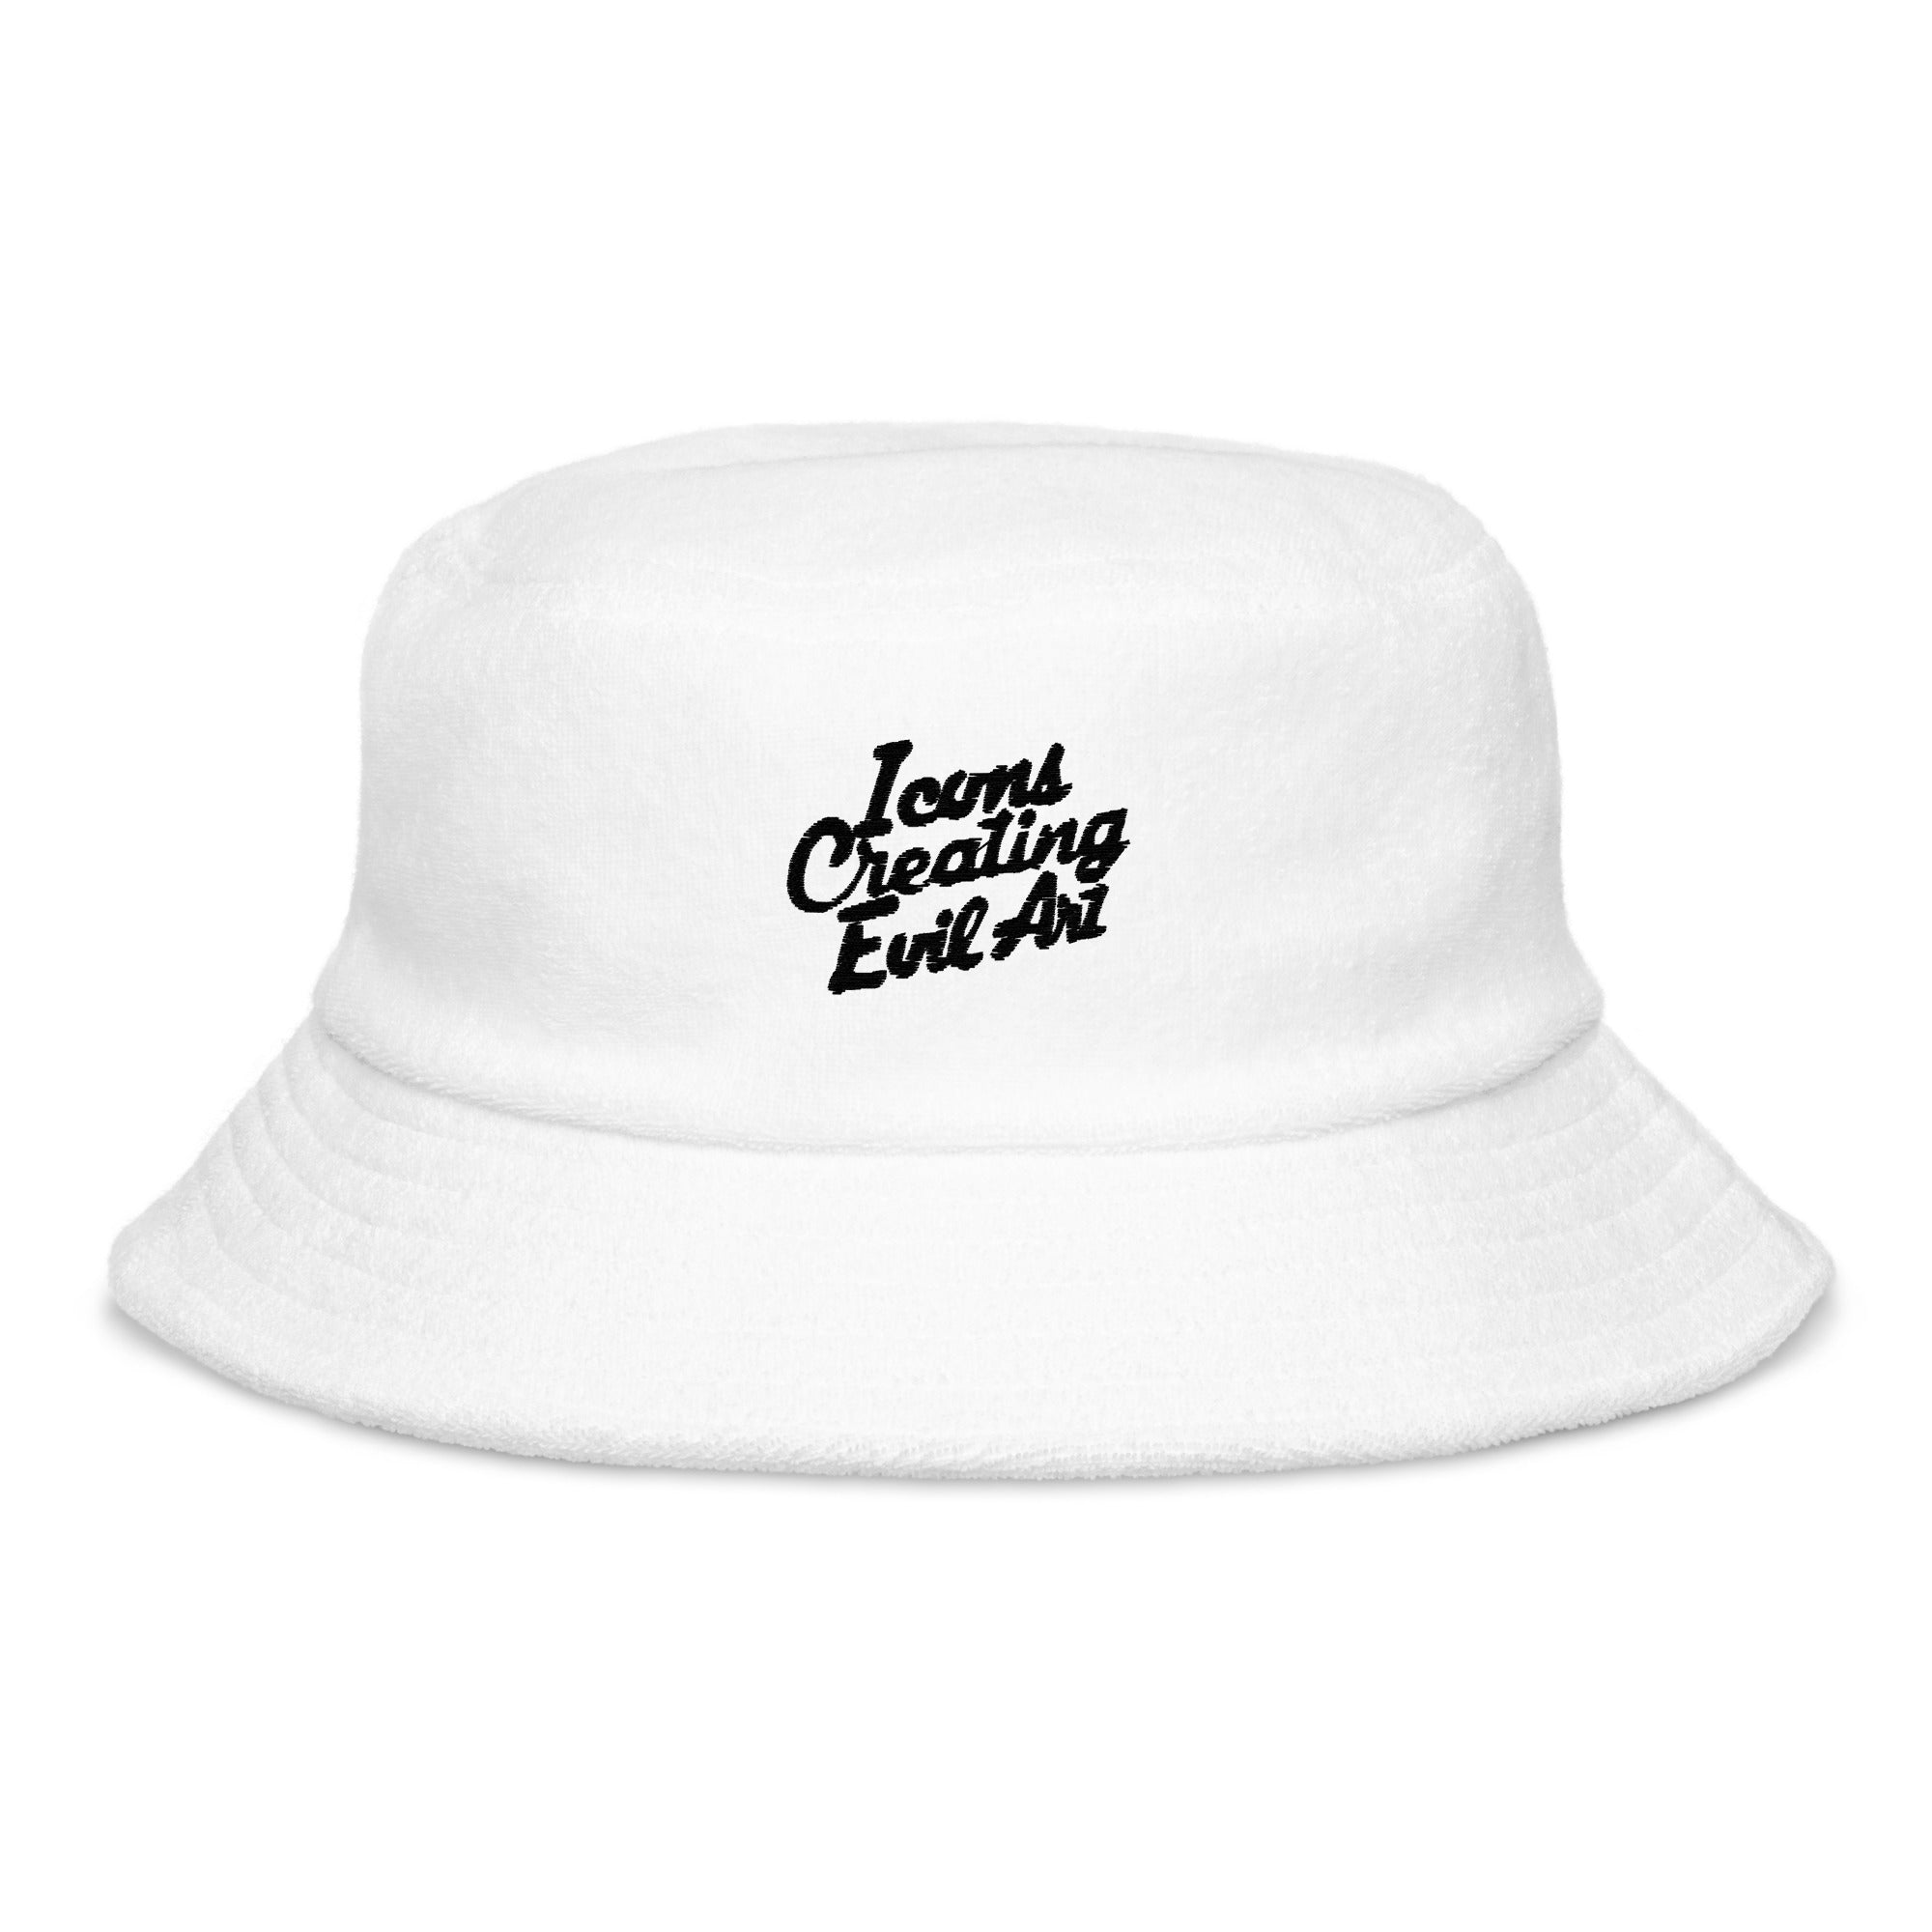 Embroidered ICEA - logo terry cloth bucket hat